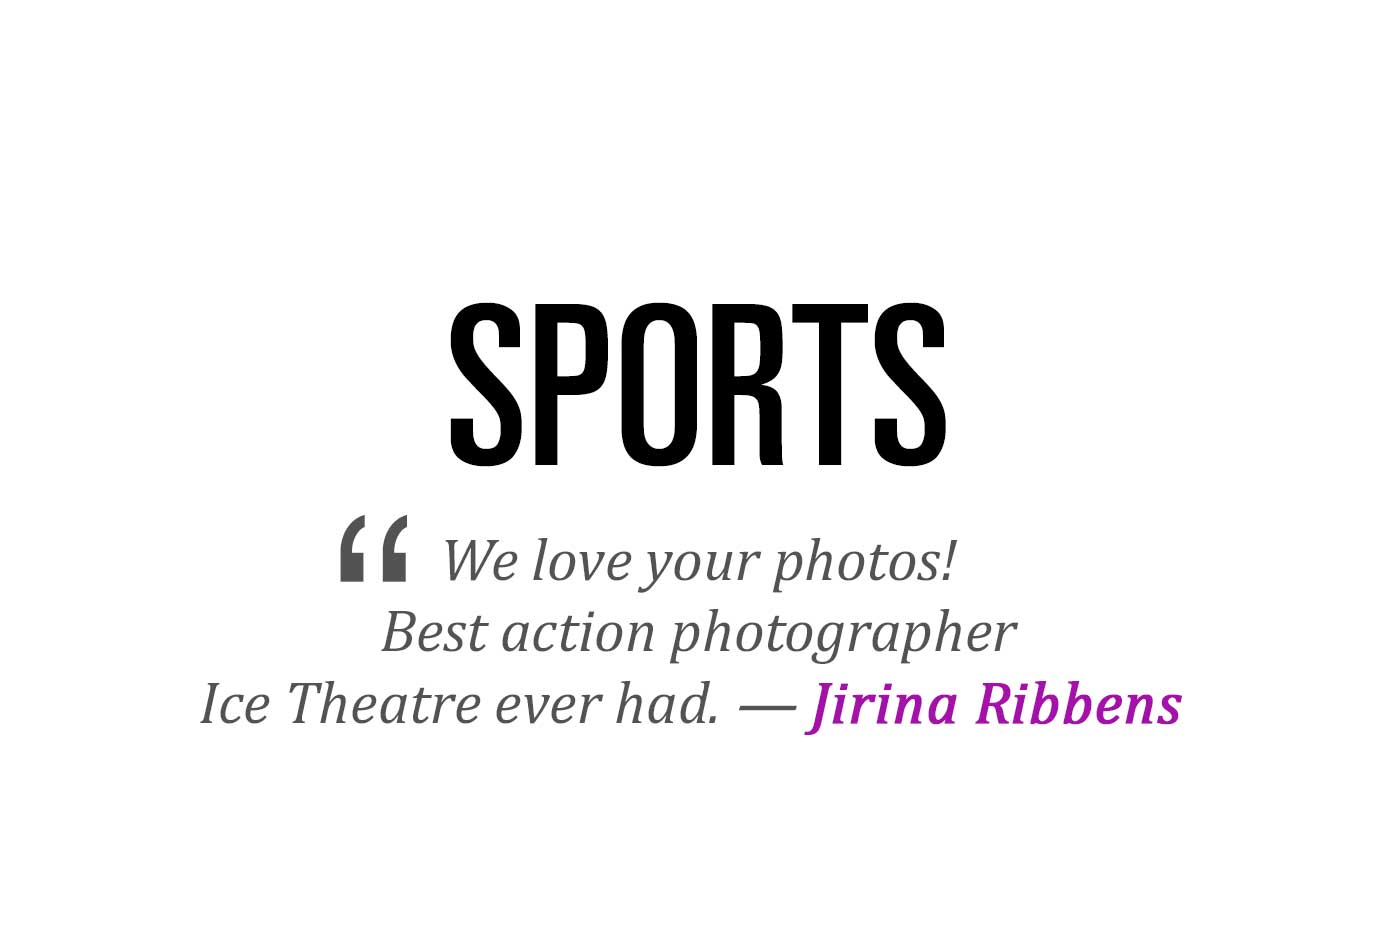 sports photography - We love your photos!Best action photographerIce Theatre ever had.